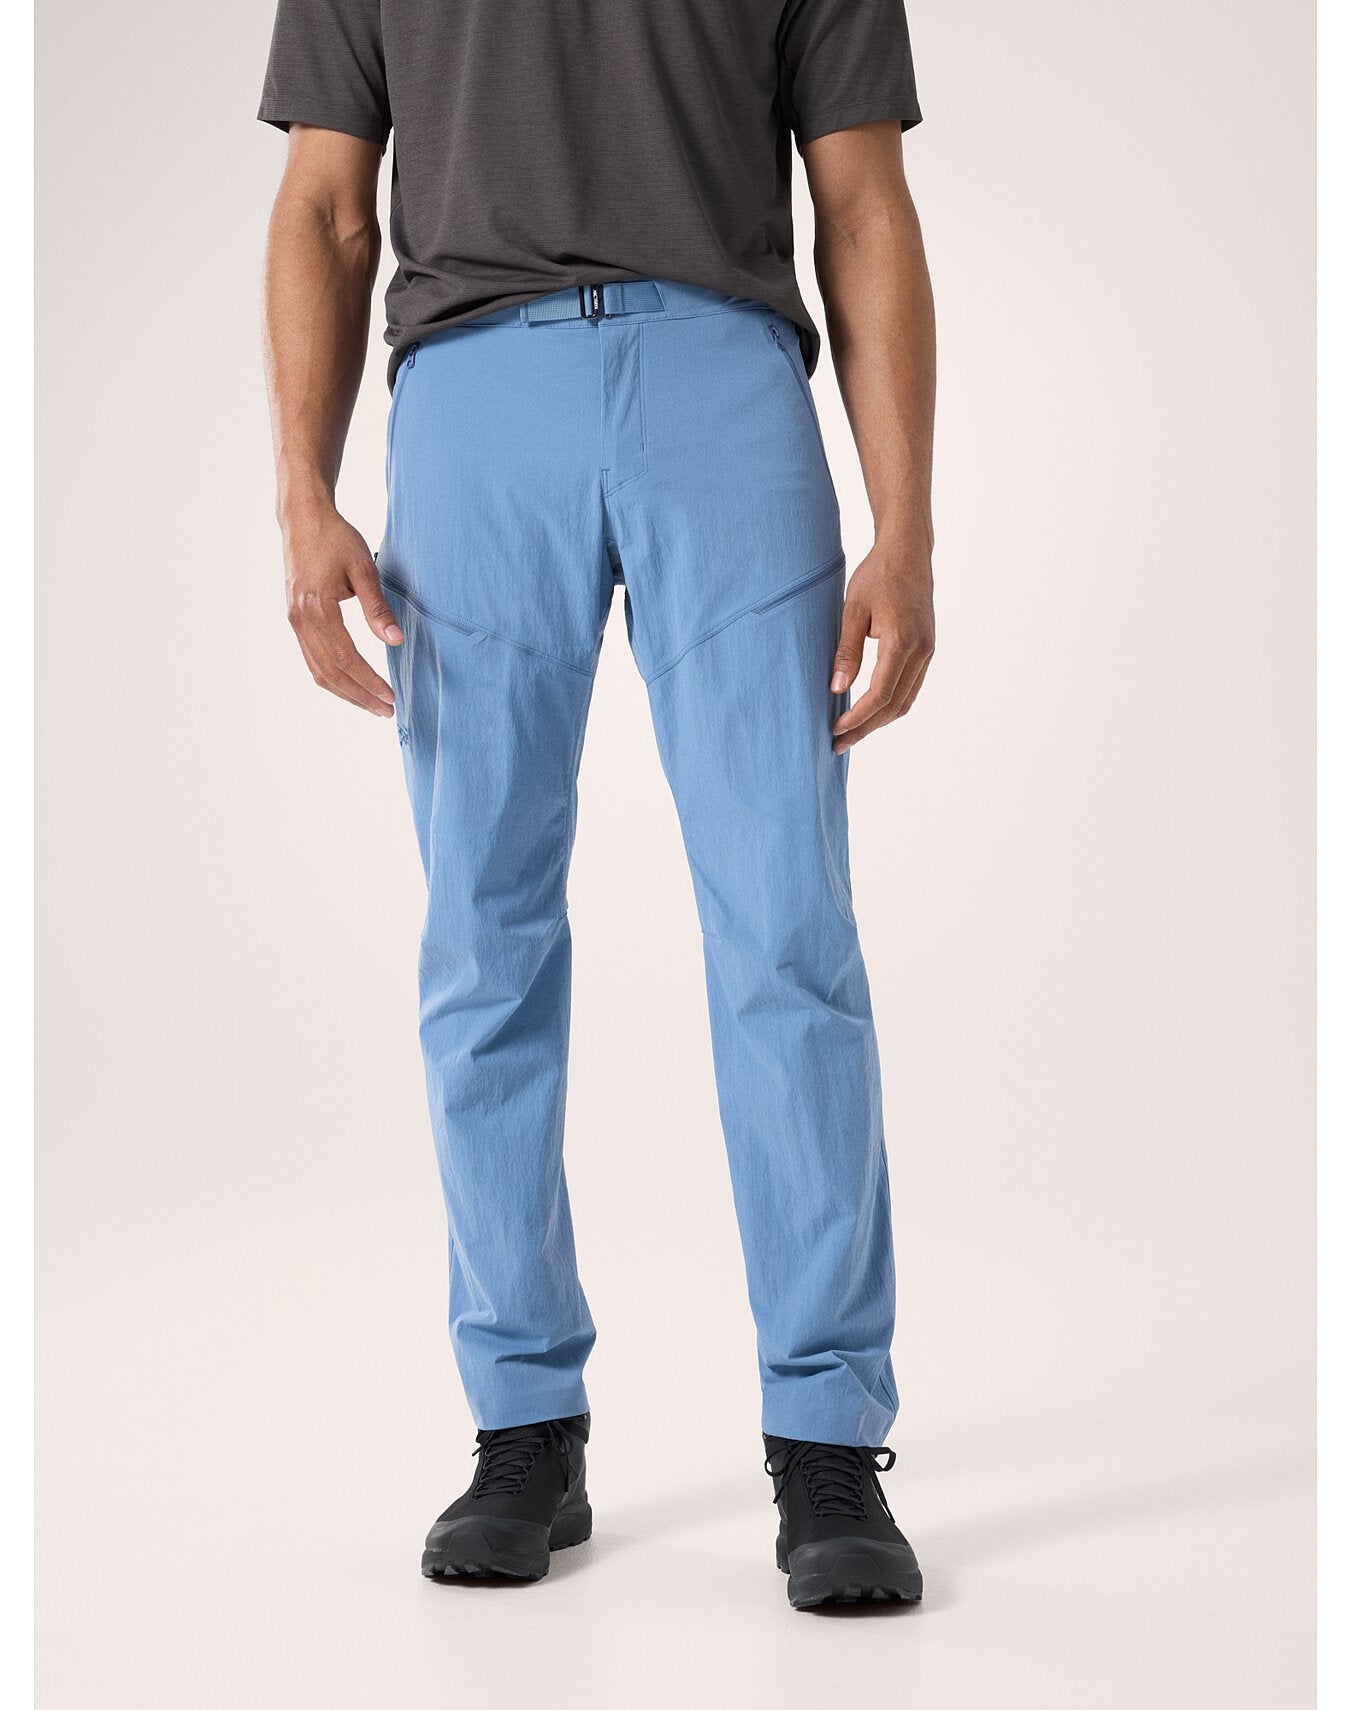 S24-X000007185-Gamma-Quick-Dry-Pant-Stone-Wash-Front-View.jpg